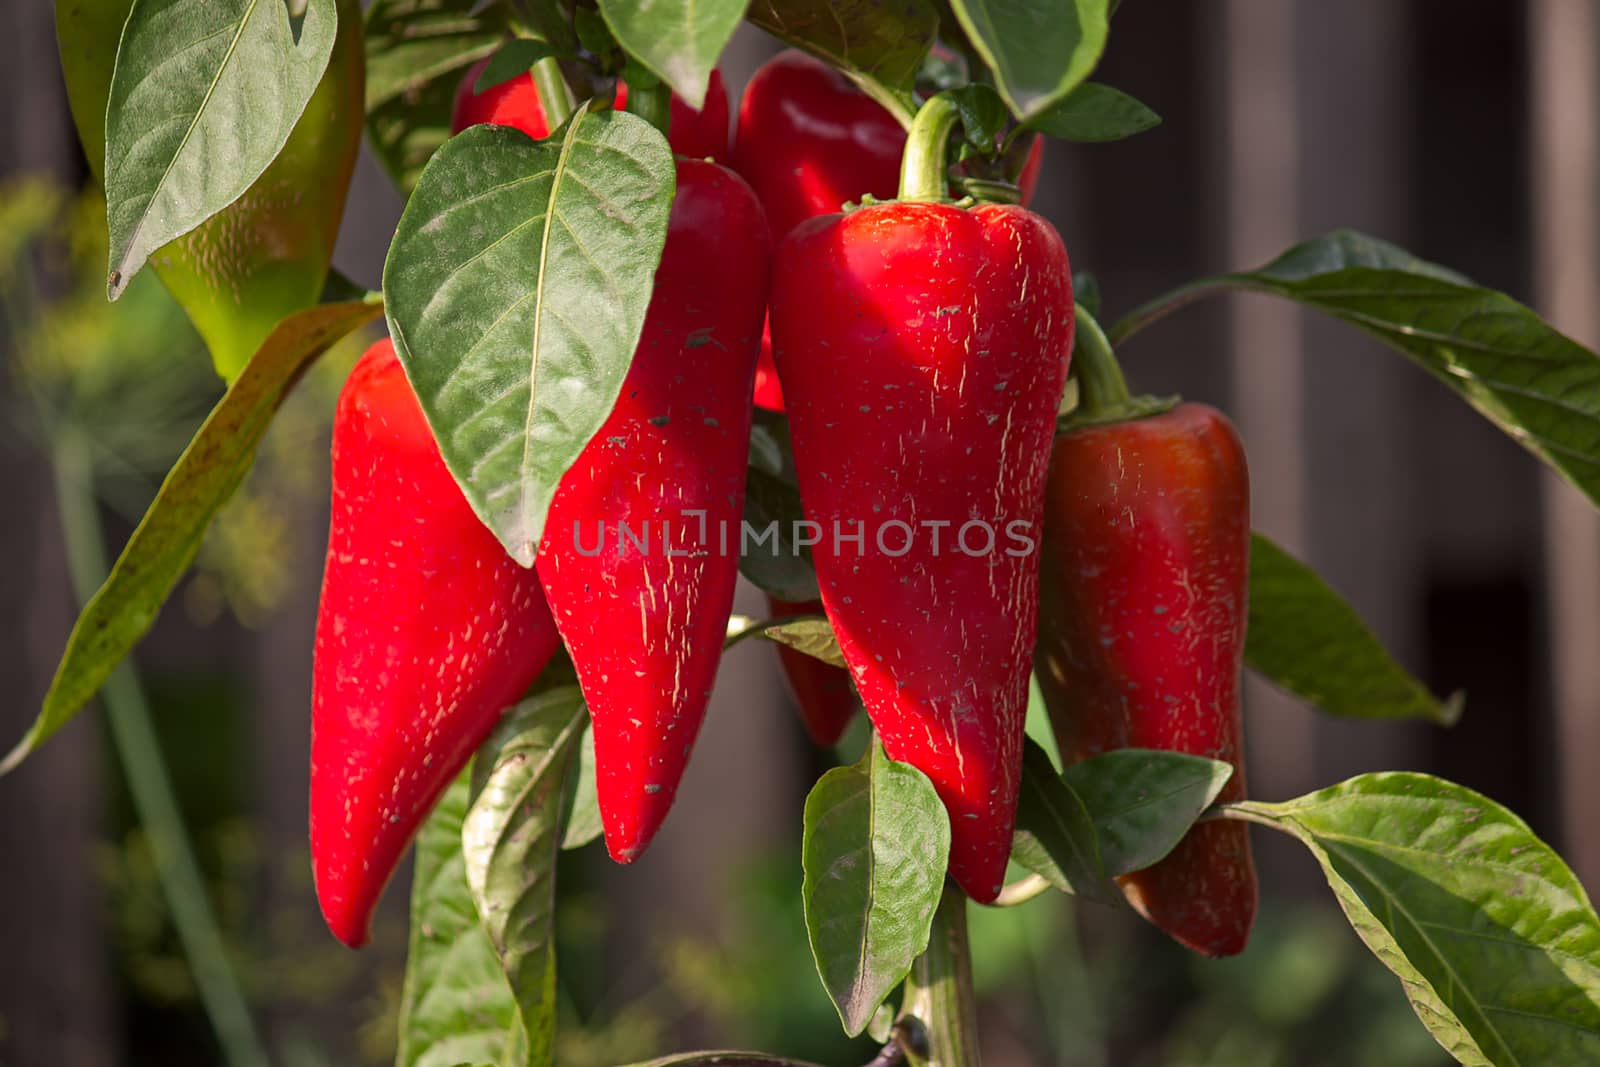 Red bell peppers on  bush plants ripened. Image with shallow depth of field.